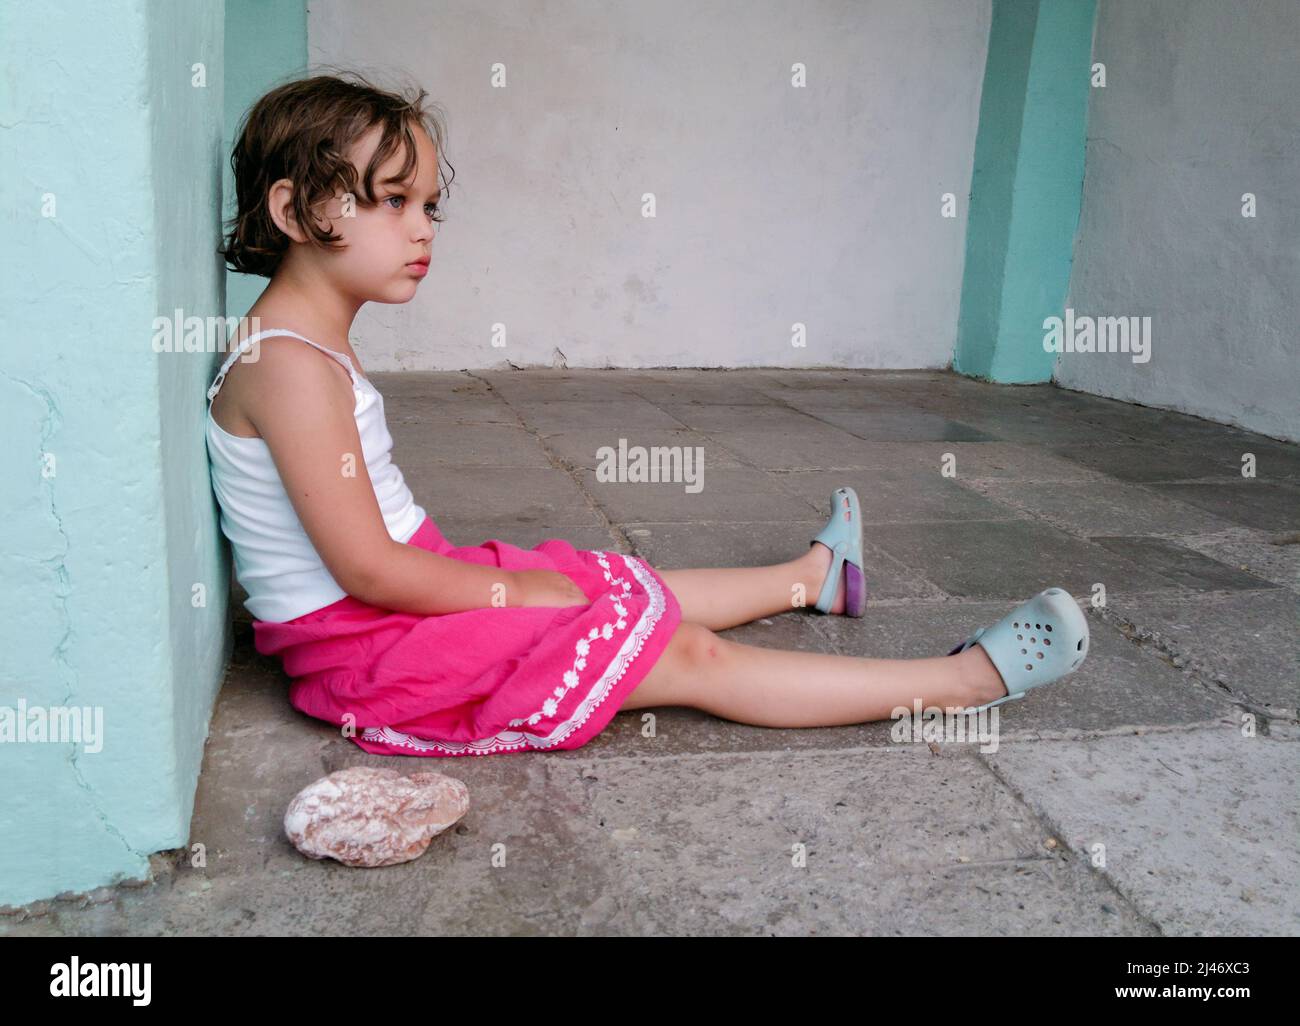 Cute angry girl is sitting on the floor near big stone. Concept of children behavior problem. Stock Photo